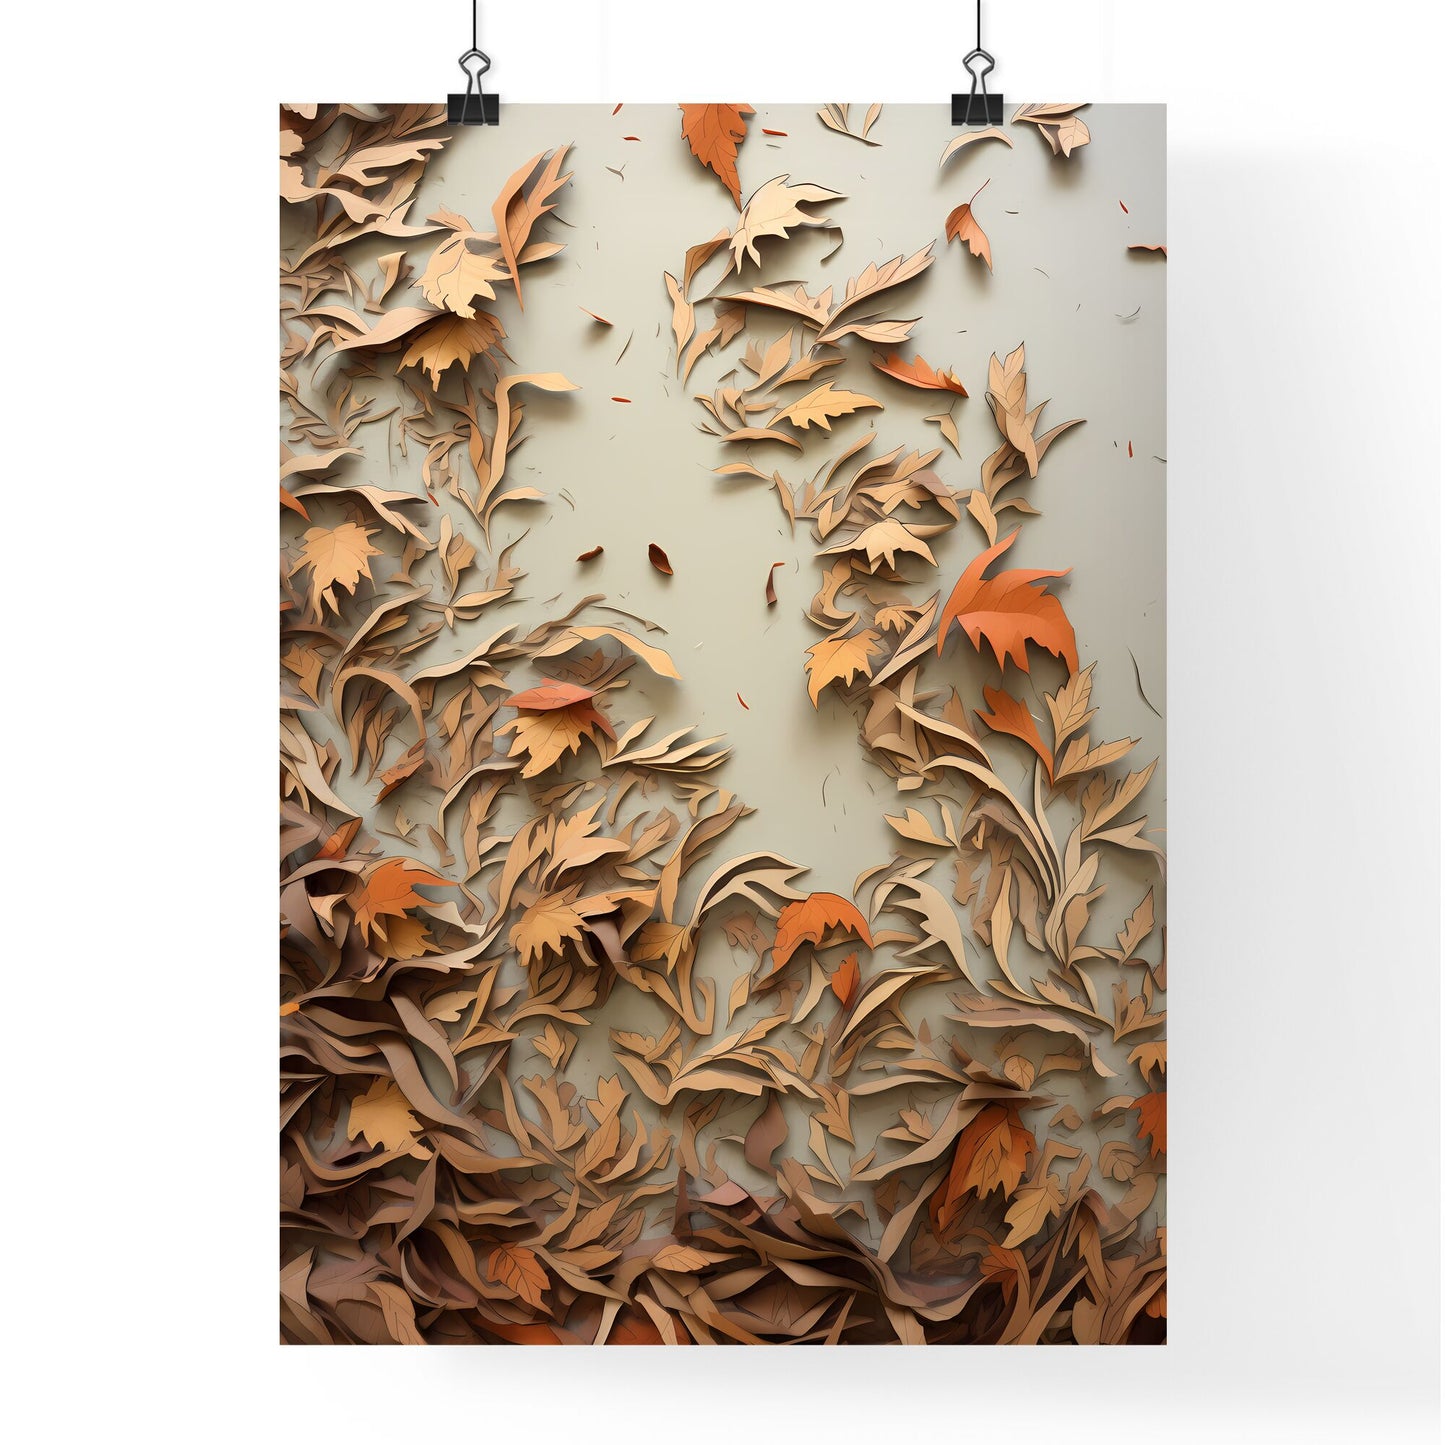 A Group Of Leaves On A White Surface Default Title